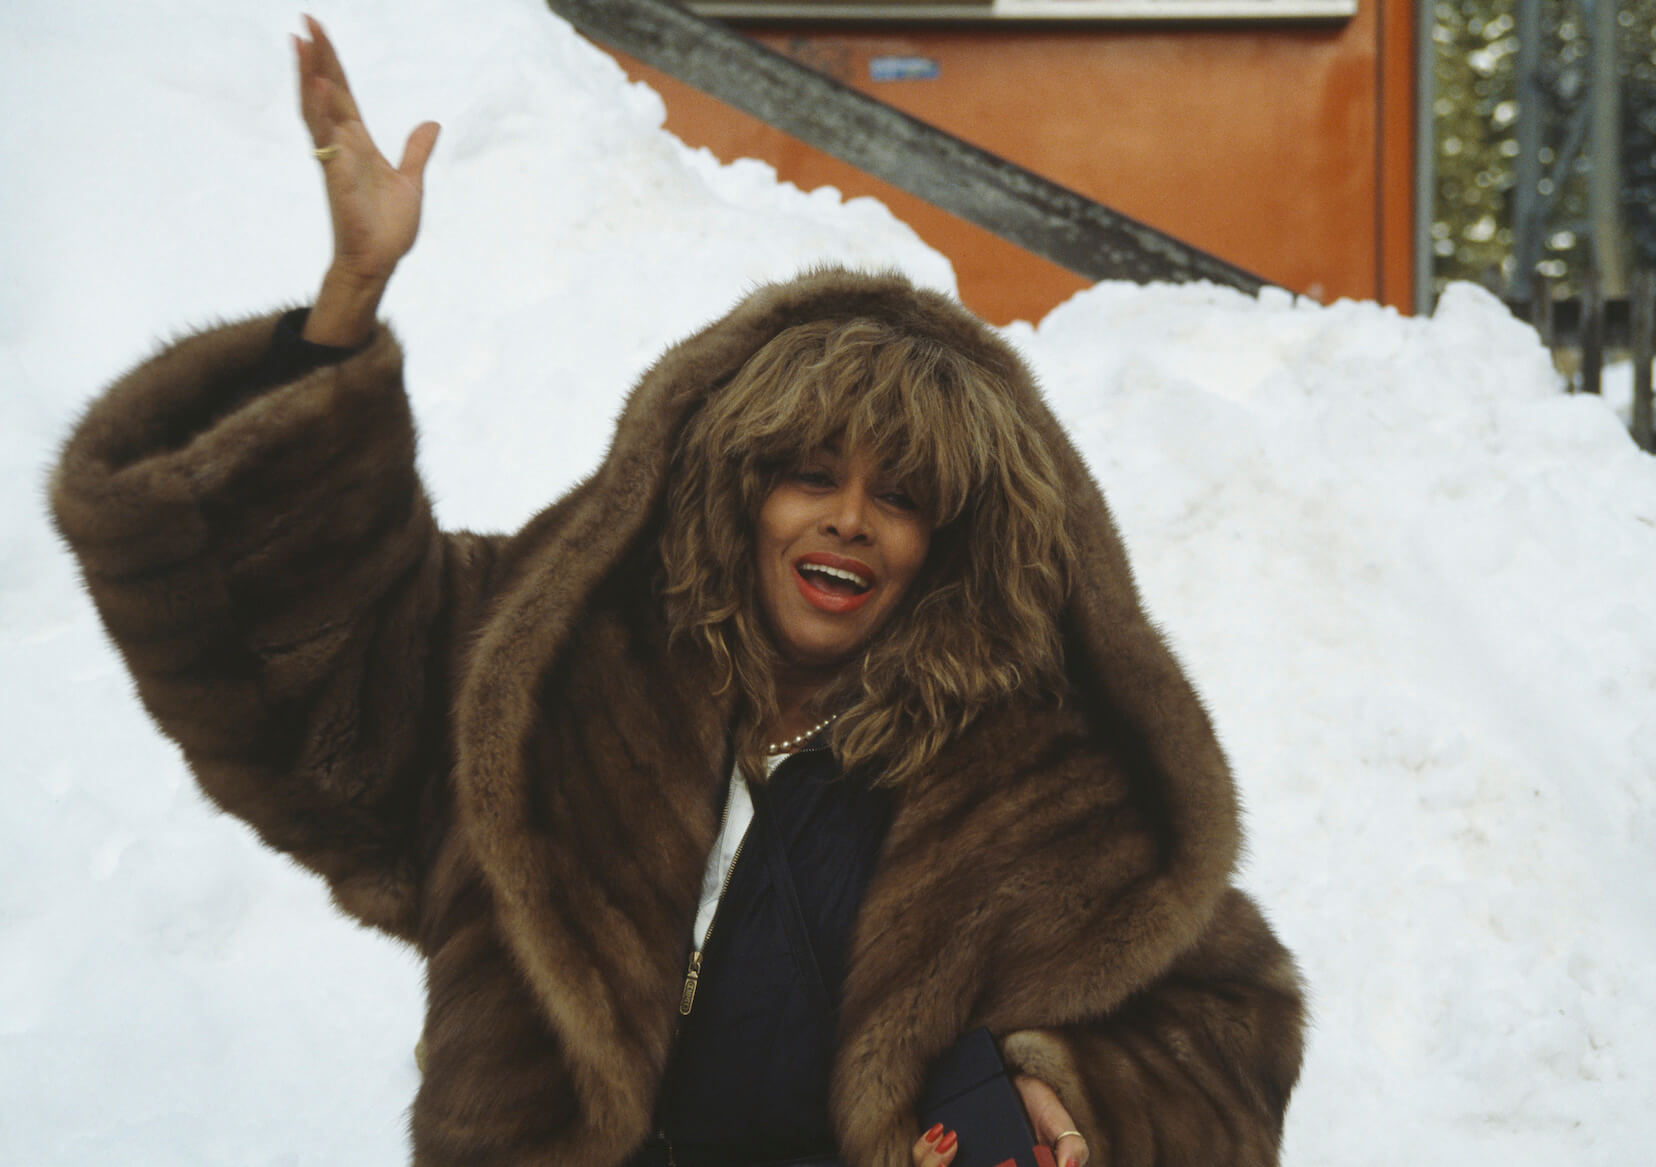 Tina Turner wearing a heavy coat outdoors in the snow while holding her hand up